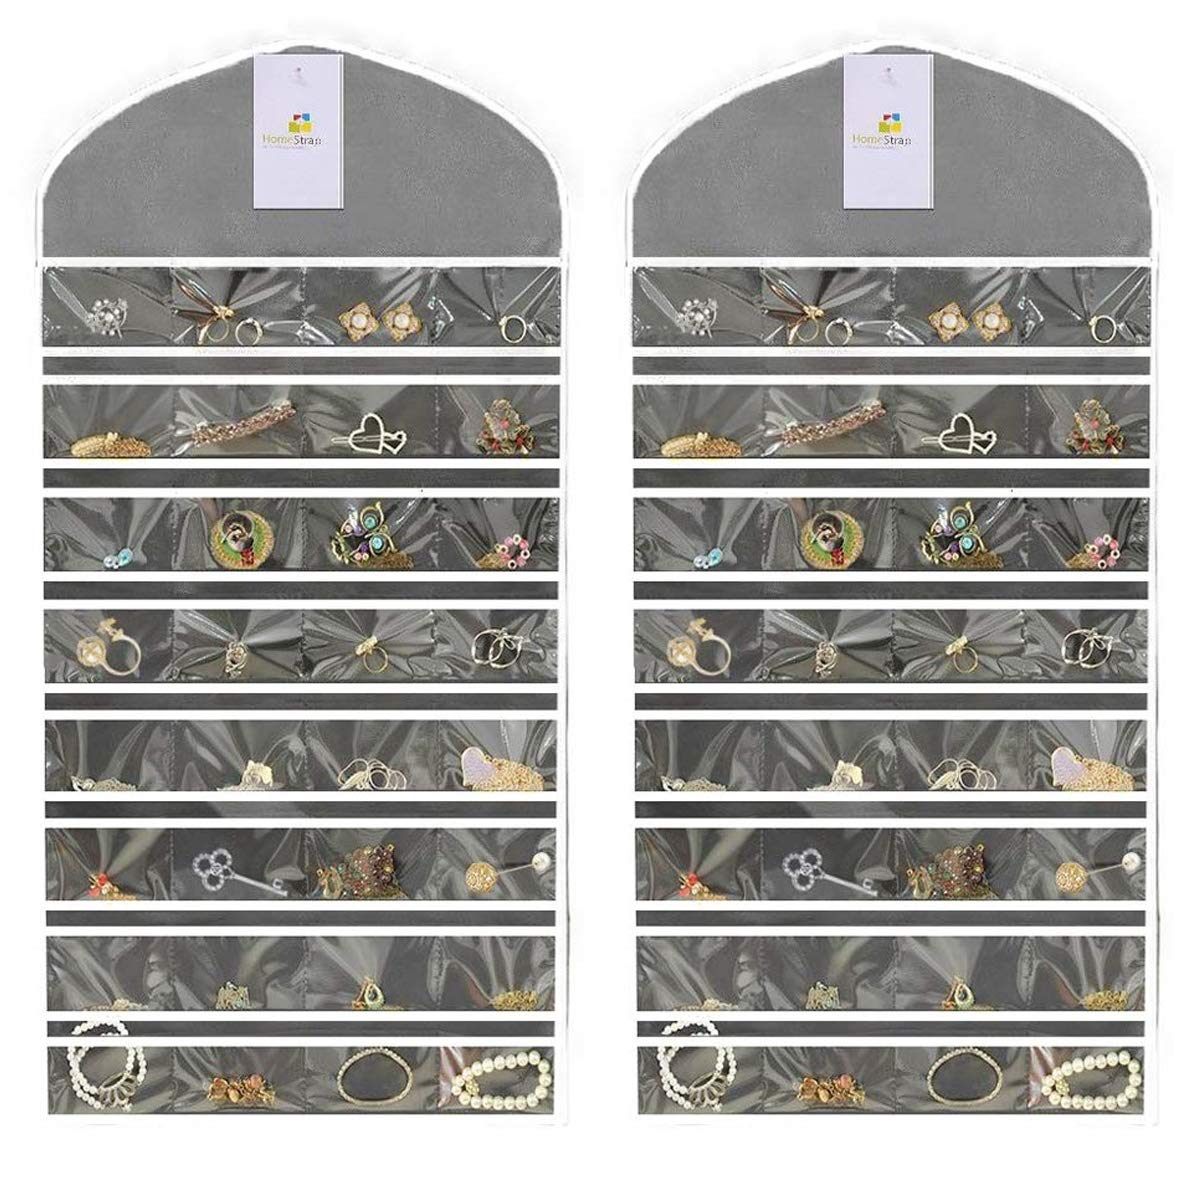 Hanging Jewellery Organizer | Double Sided (Pack of 2)